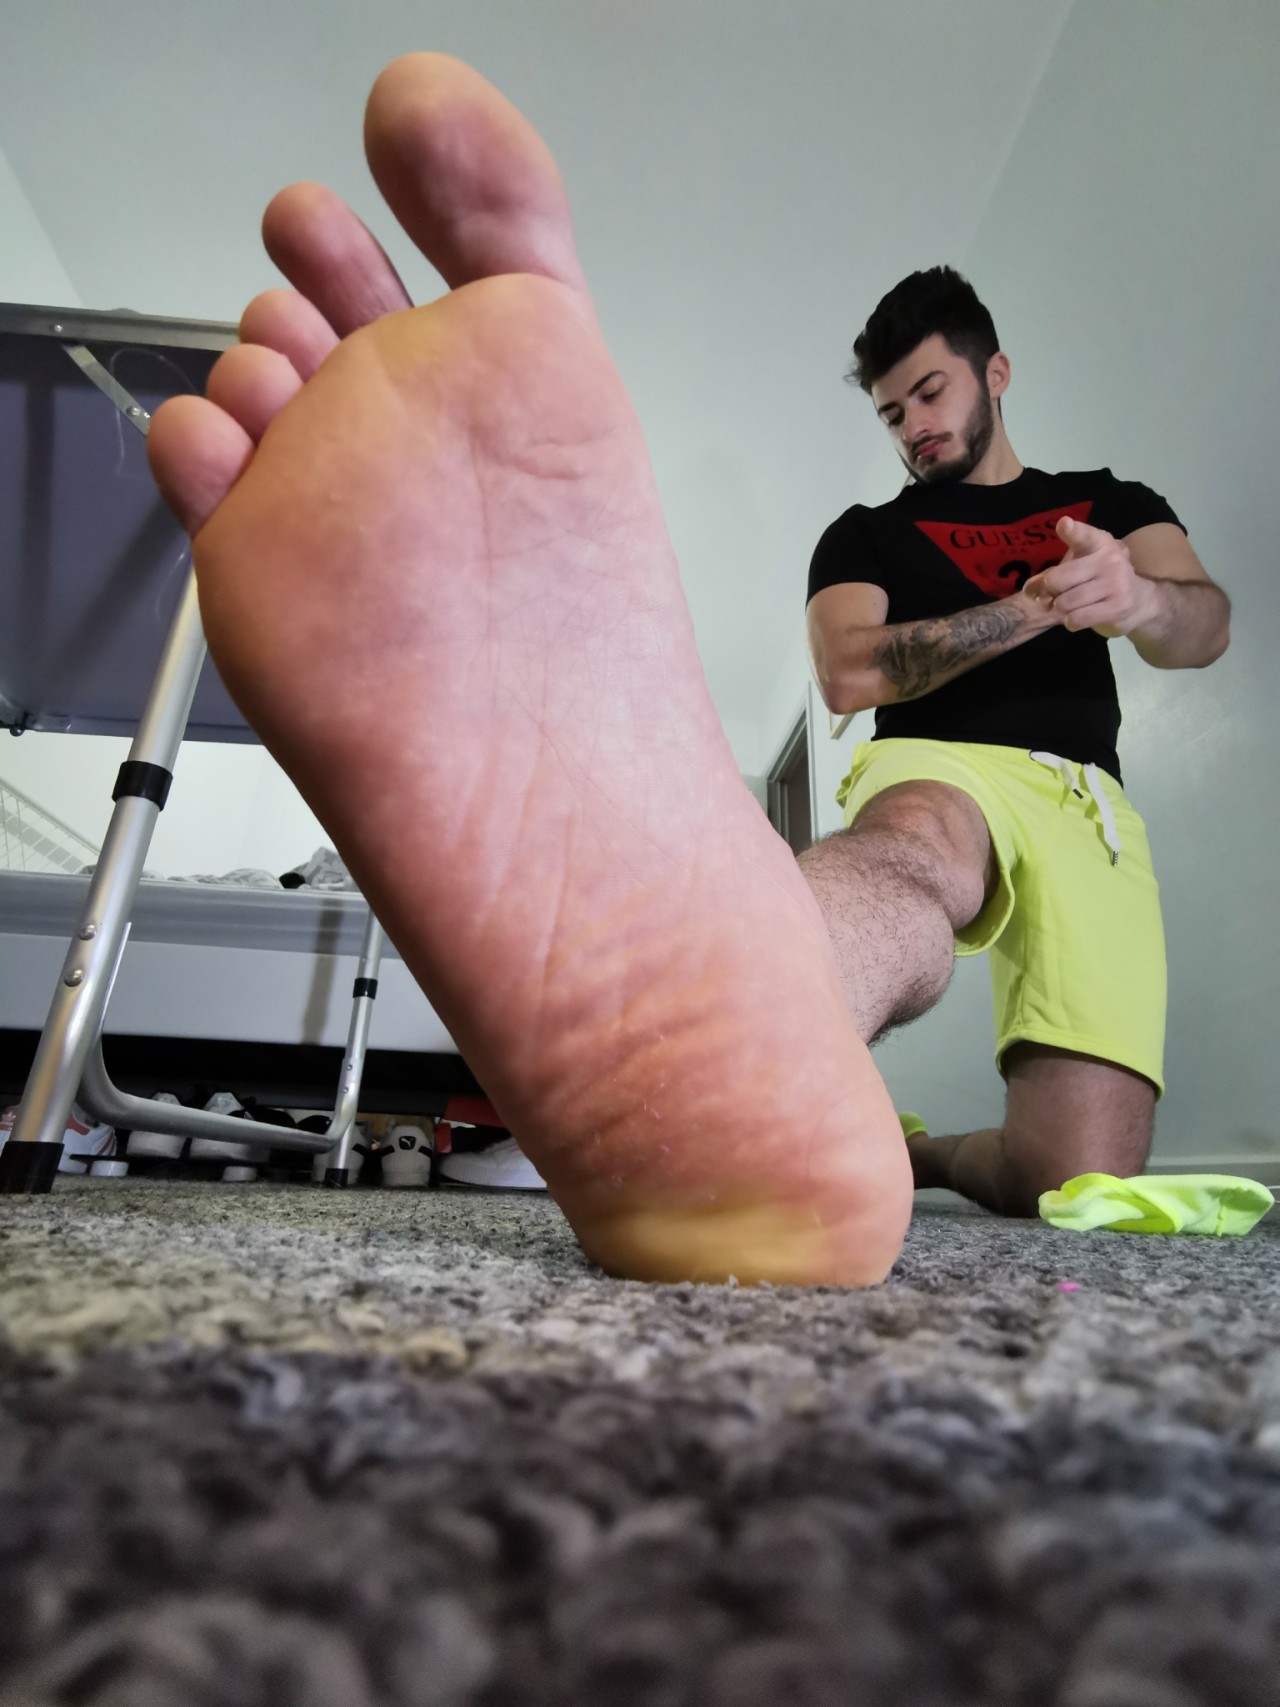 masterfzzz:Kneel down in front of supremacy 👊🏼🦶🏼#findom #macrophilia #footmaster #alphafoot #finsub #finslave #cashfag #cashmaster #cashslave #cashcow #paypig #humanATM #humanwallet  The repetition gives me a hardon 